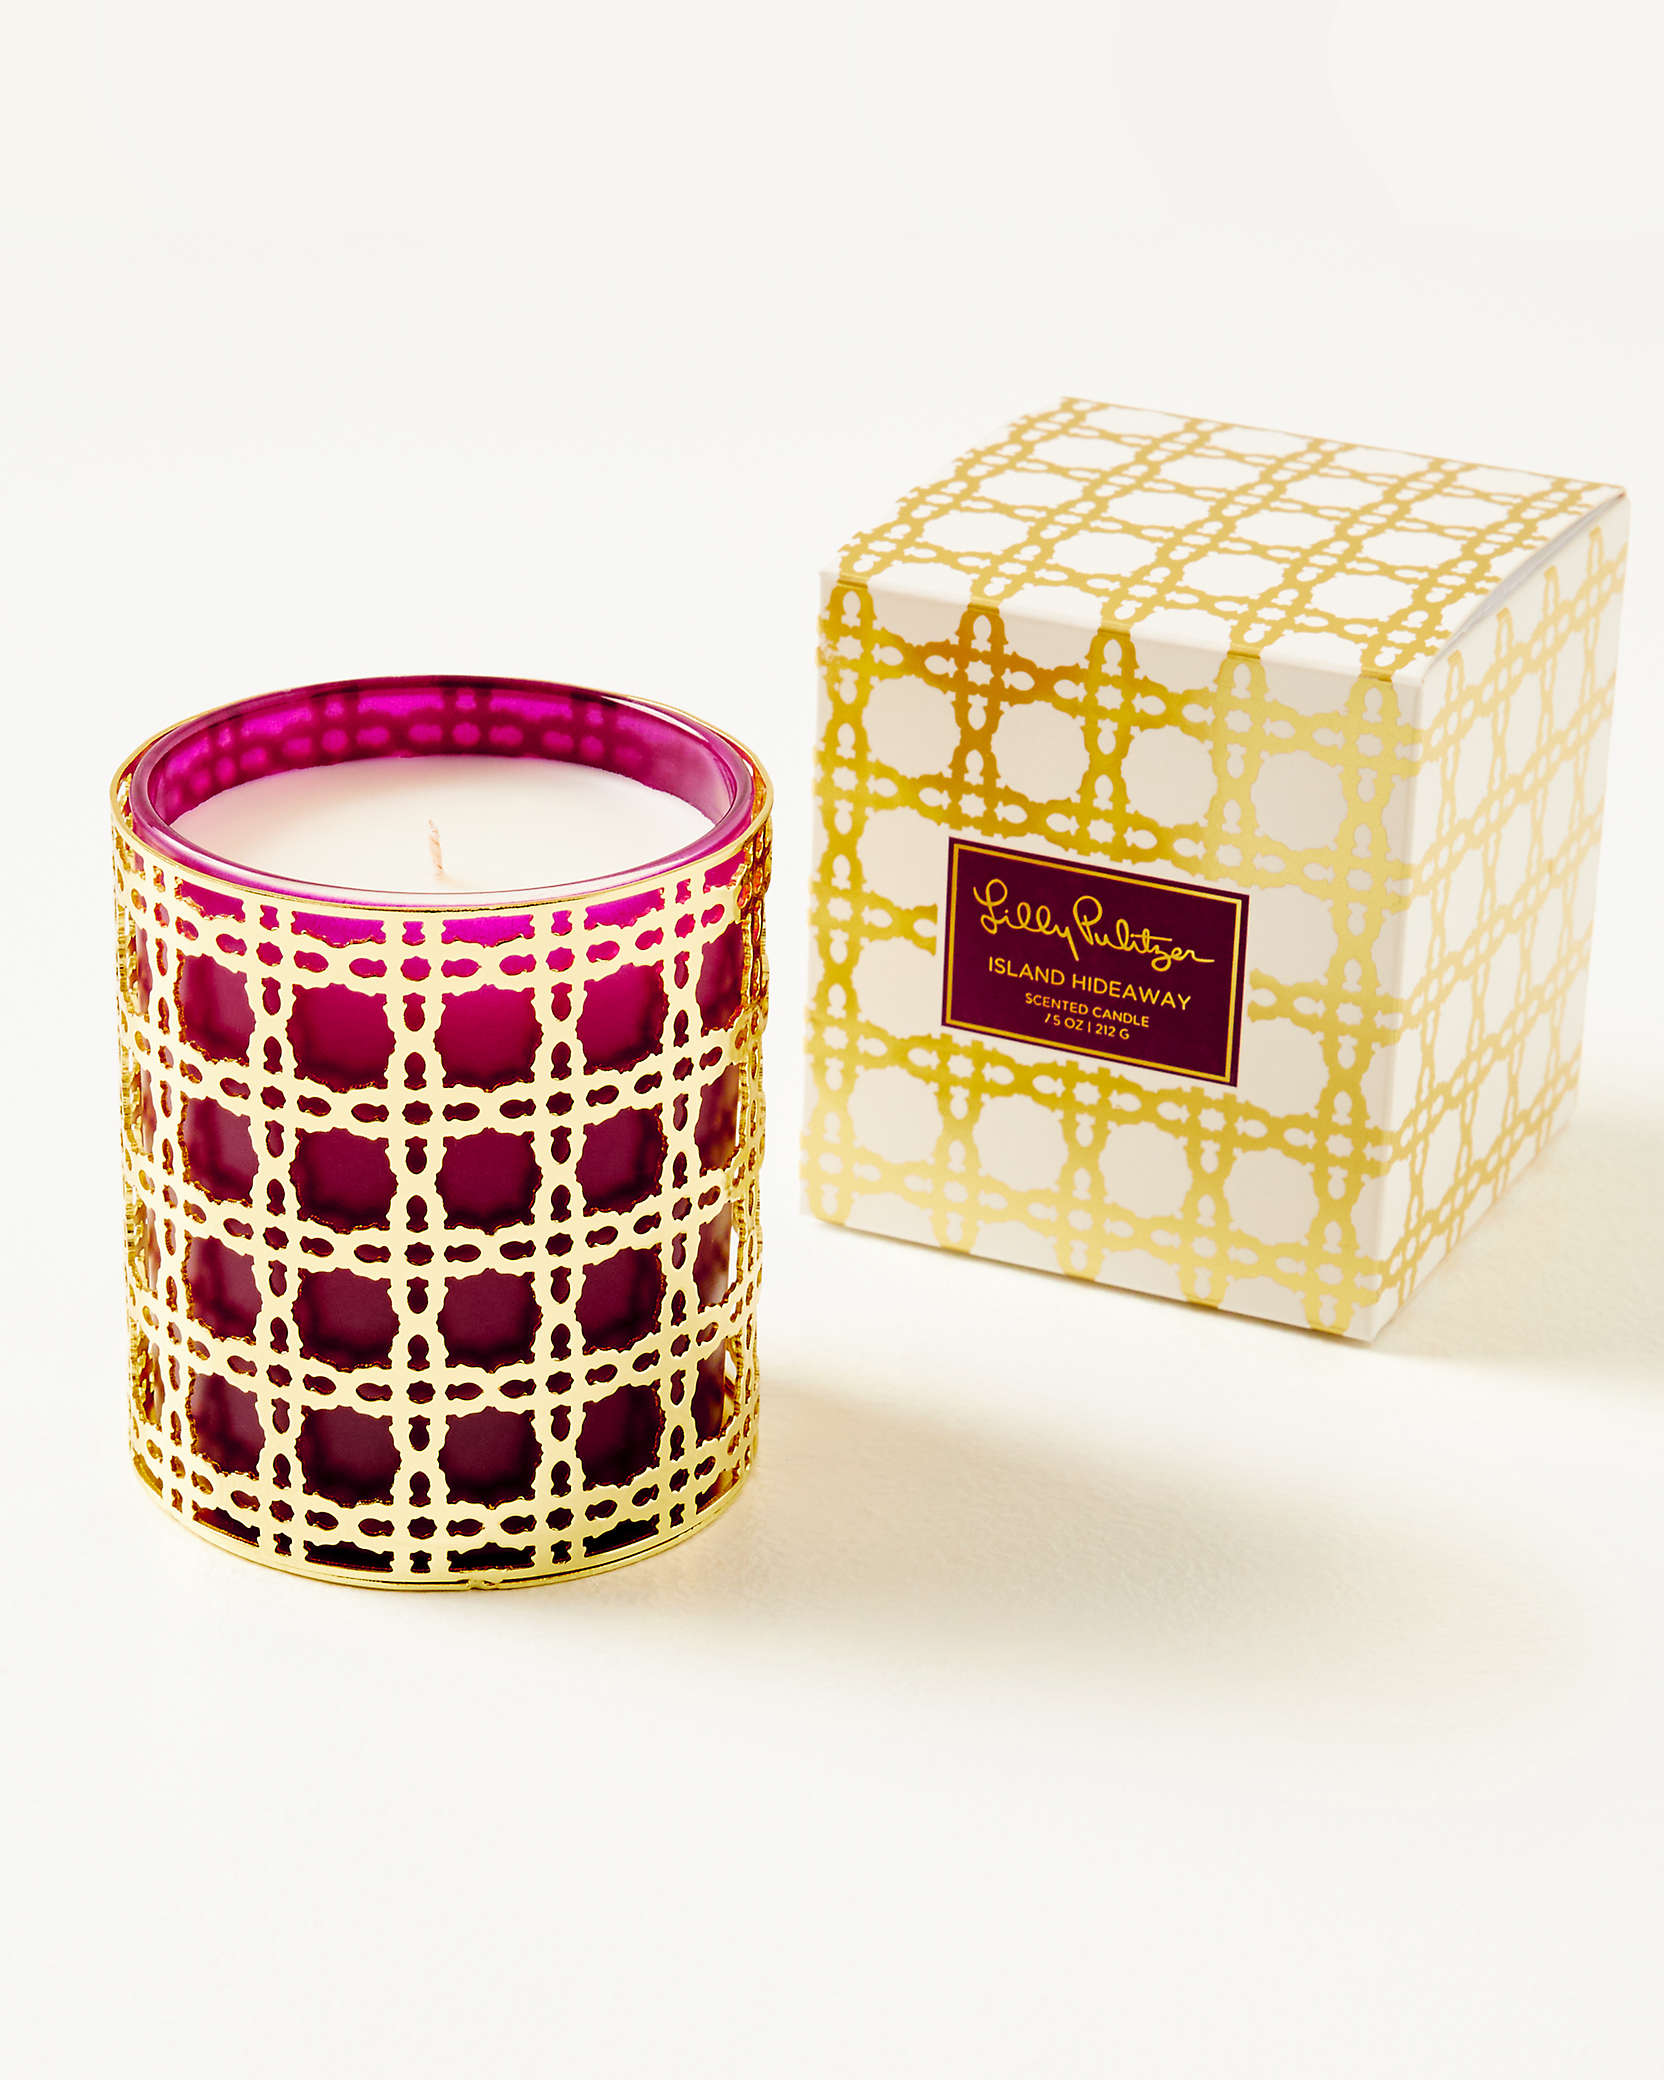 Lilly Pulitzer Candle With Metal Caning Container In Amarena Cherry